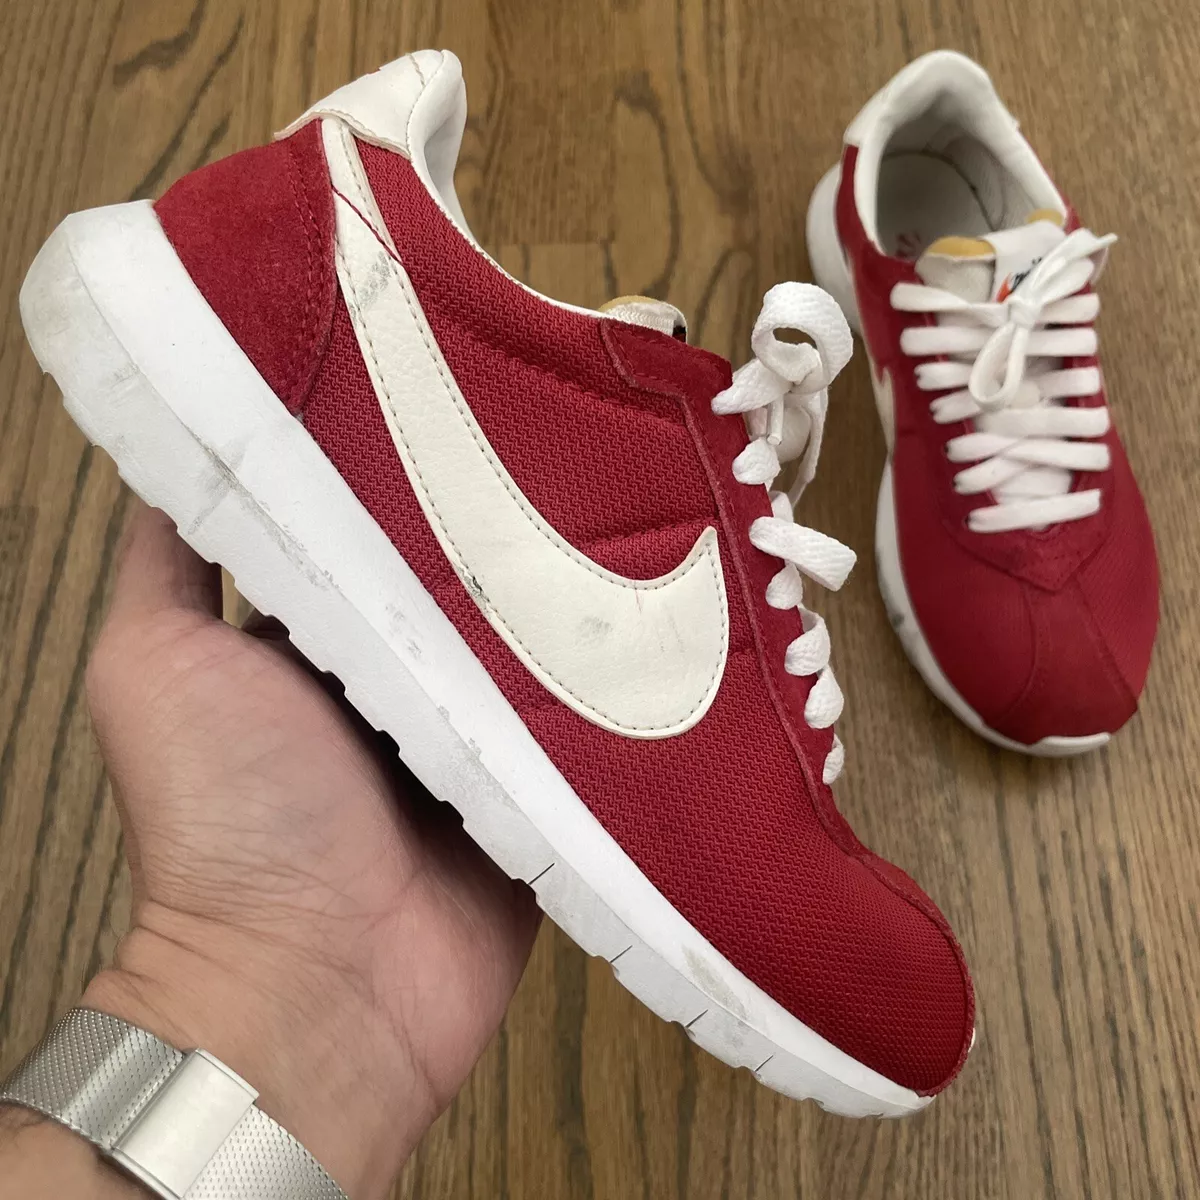 Visible Canguro callejón Nike Roshe LD-1000 QS 810382-601 Varsity Red / White Canvas Suede Womens  Size 6 | eBay